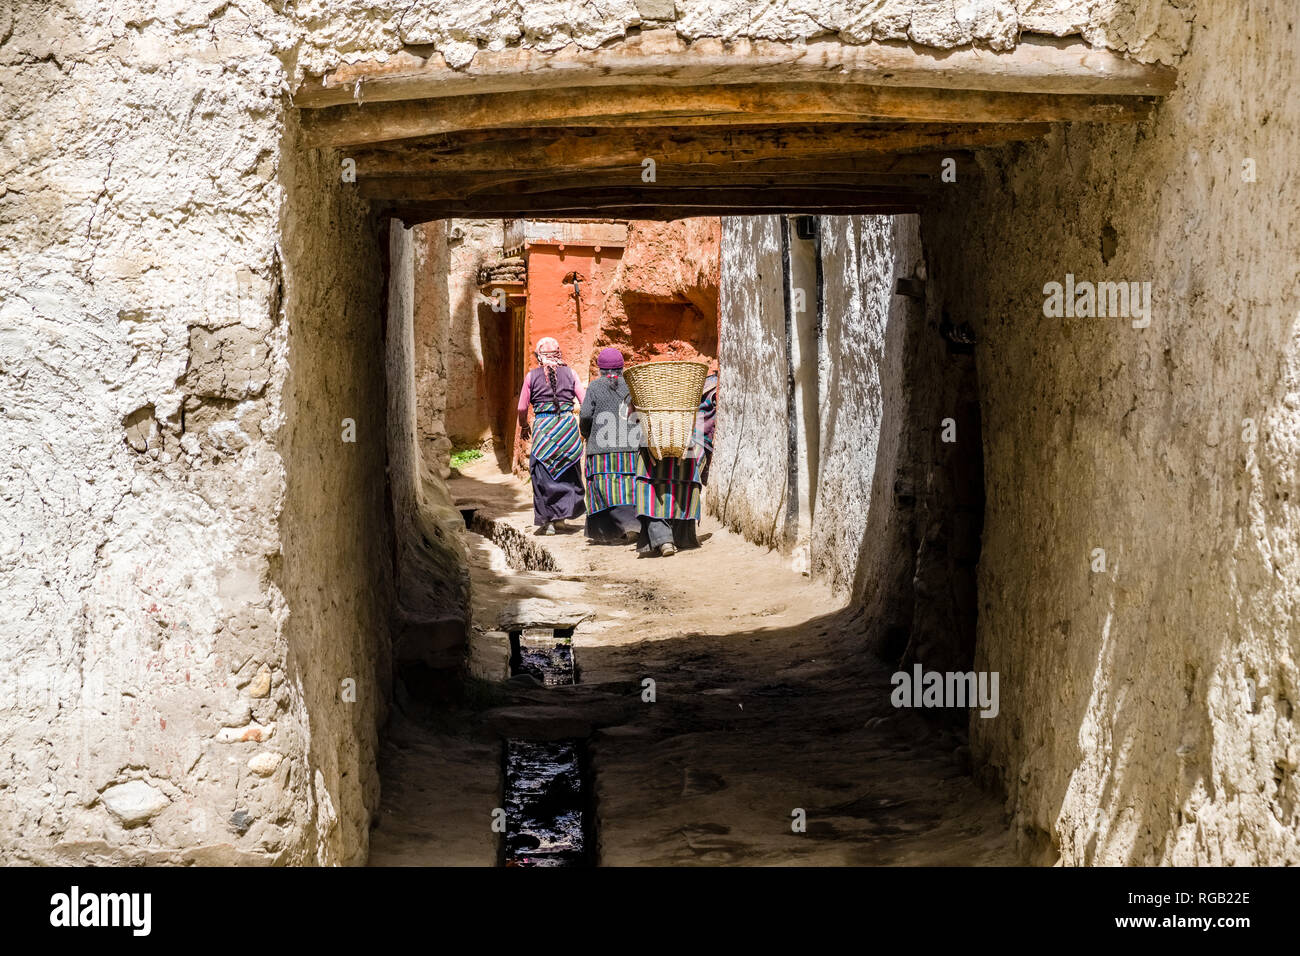 Small alley between white painted traditional houses and rock walls inside the walled town, some local women carrying baskets Stock Photo